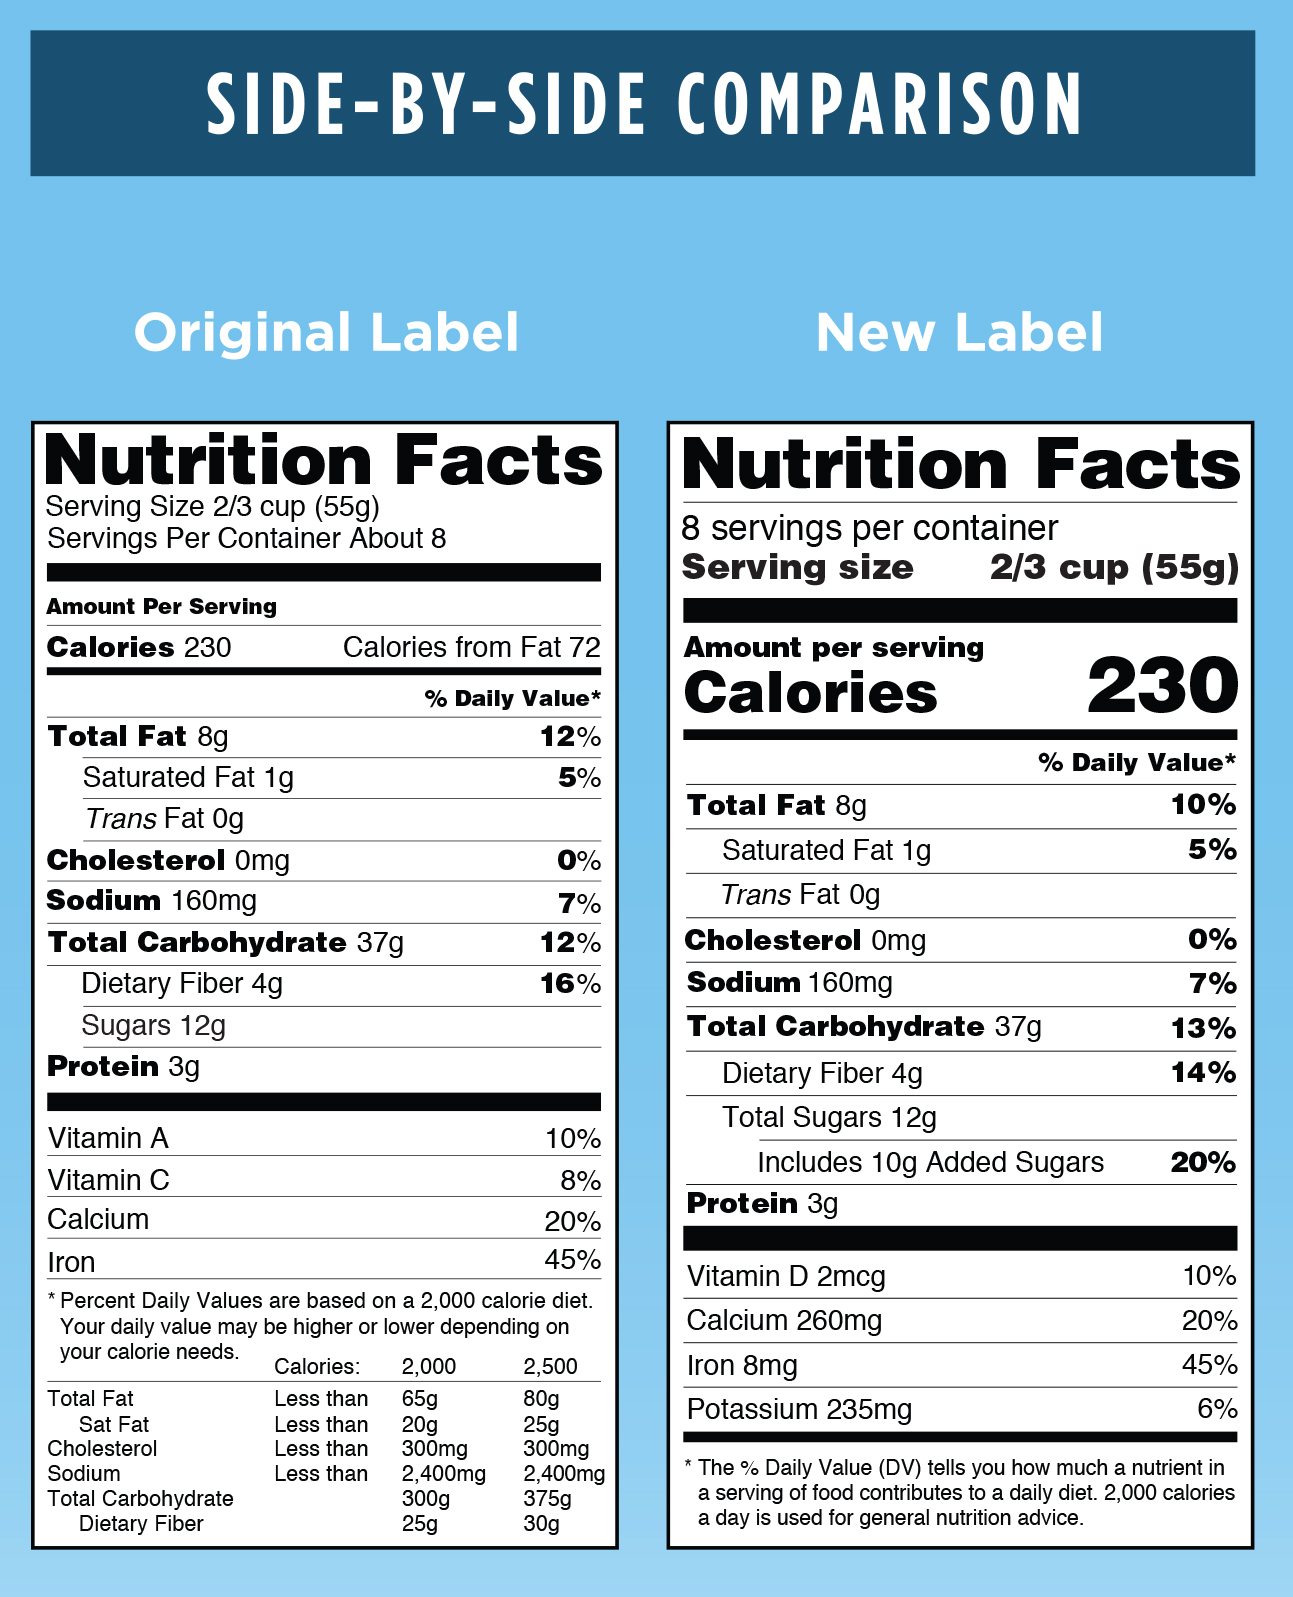 The New Food Label What’s new? What’s the same? When can we expect to